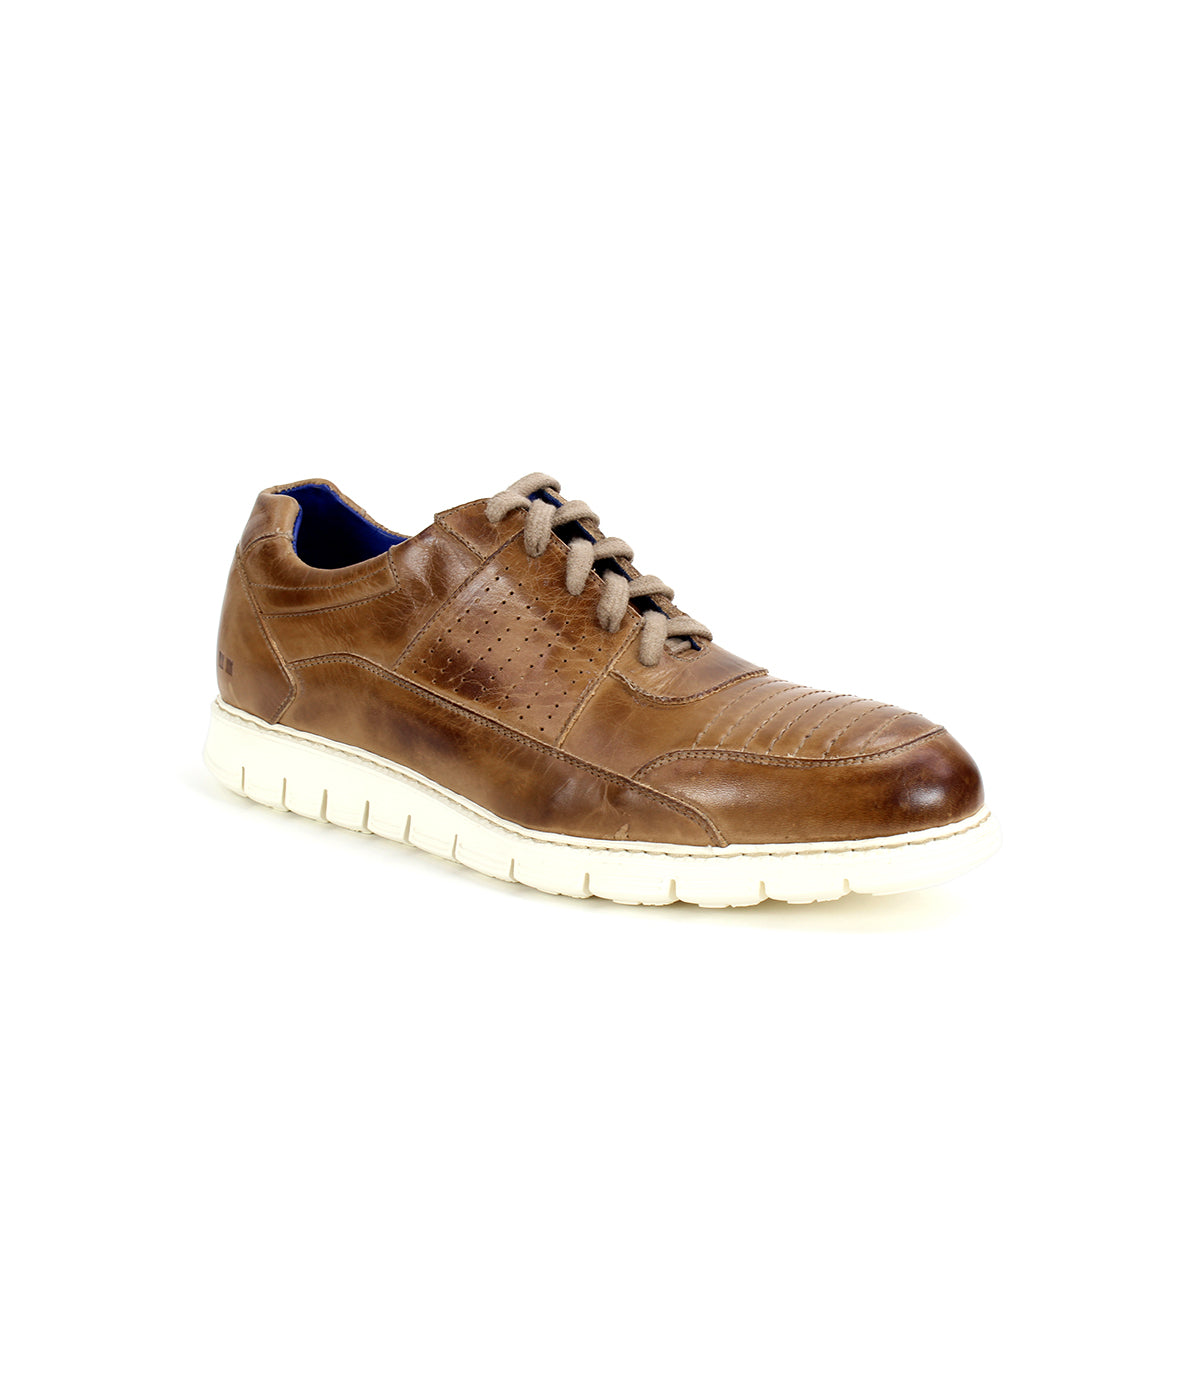 A men's brown leather lace-up shoe with intricate details by Bed Stu Fairman.